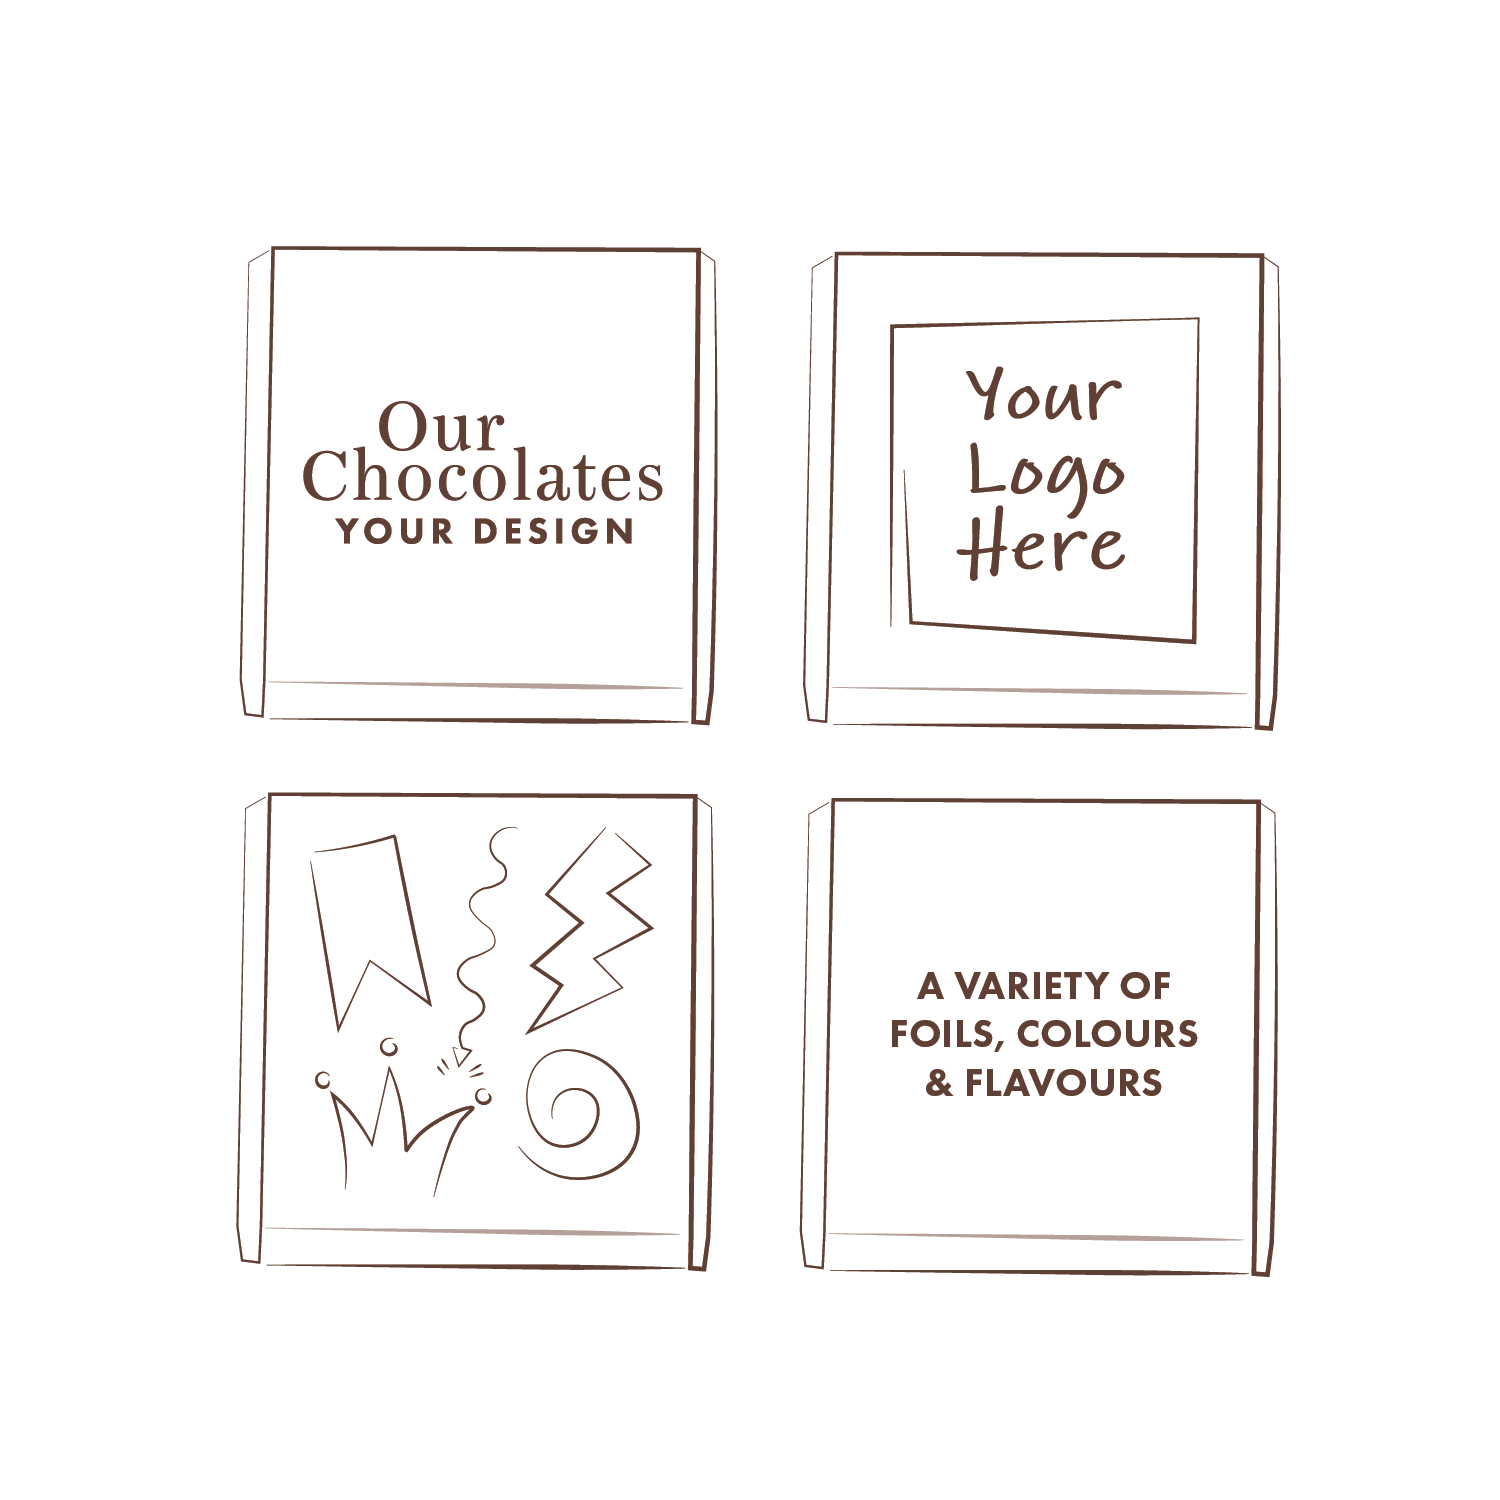 Personalised Branded Chocolate Neapolitans. Choose from custom printed wrappers, available in one-colour foil-blocked print, to perfectly showcase your logo or message